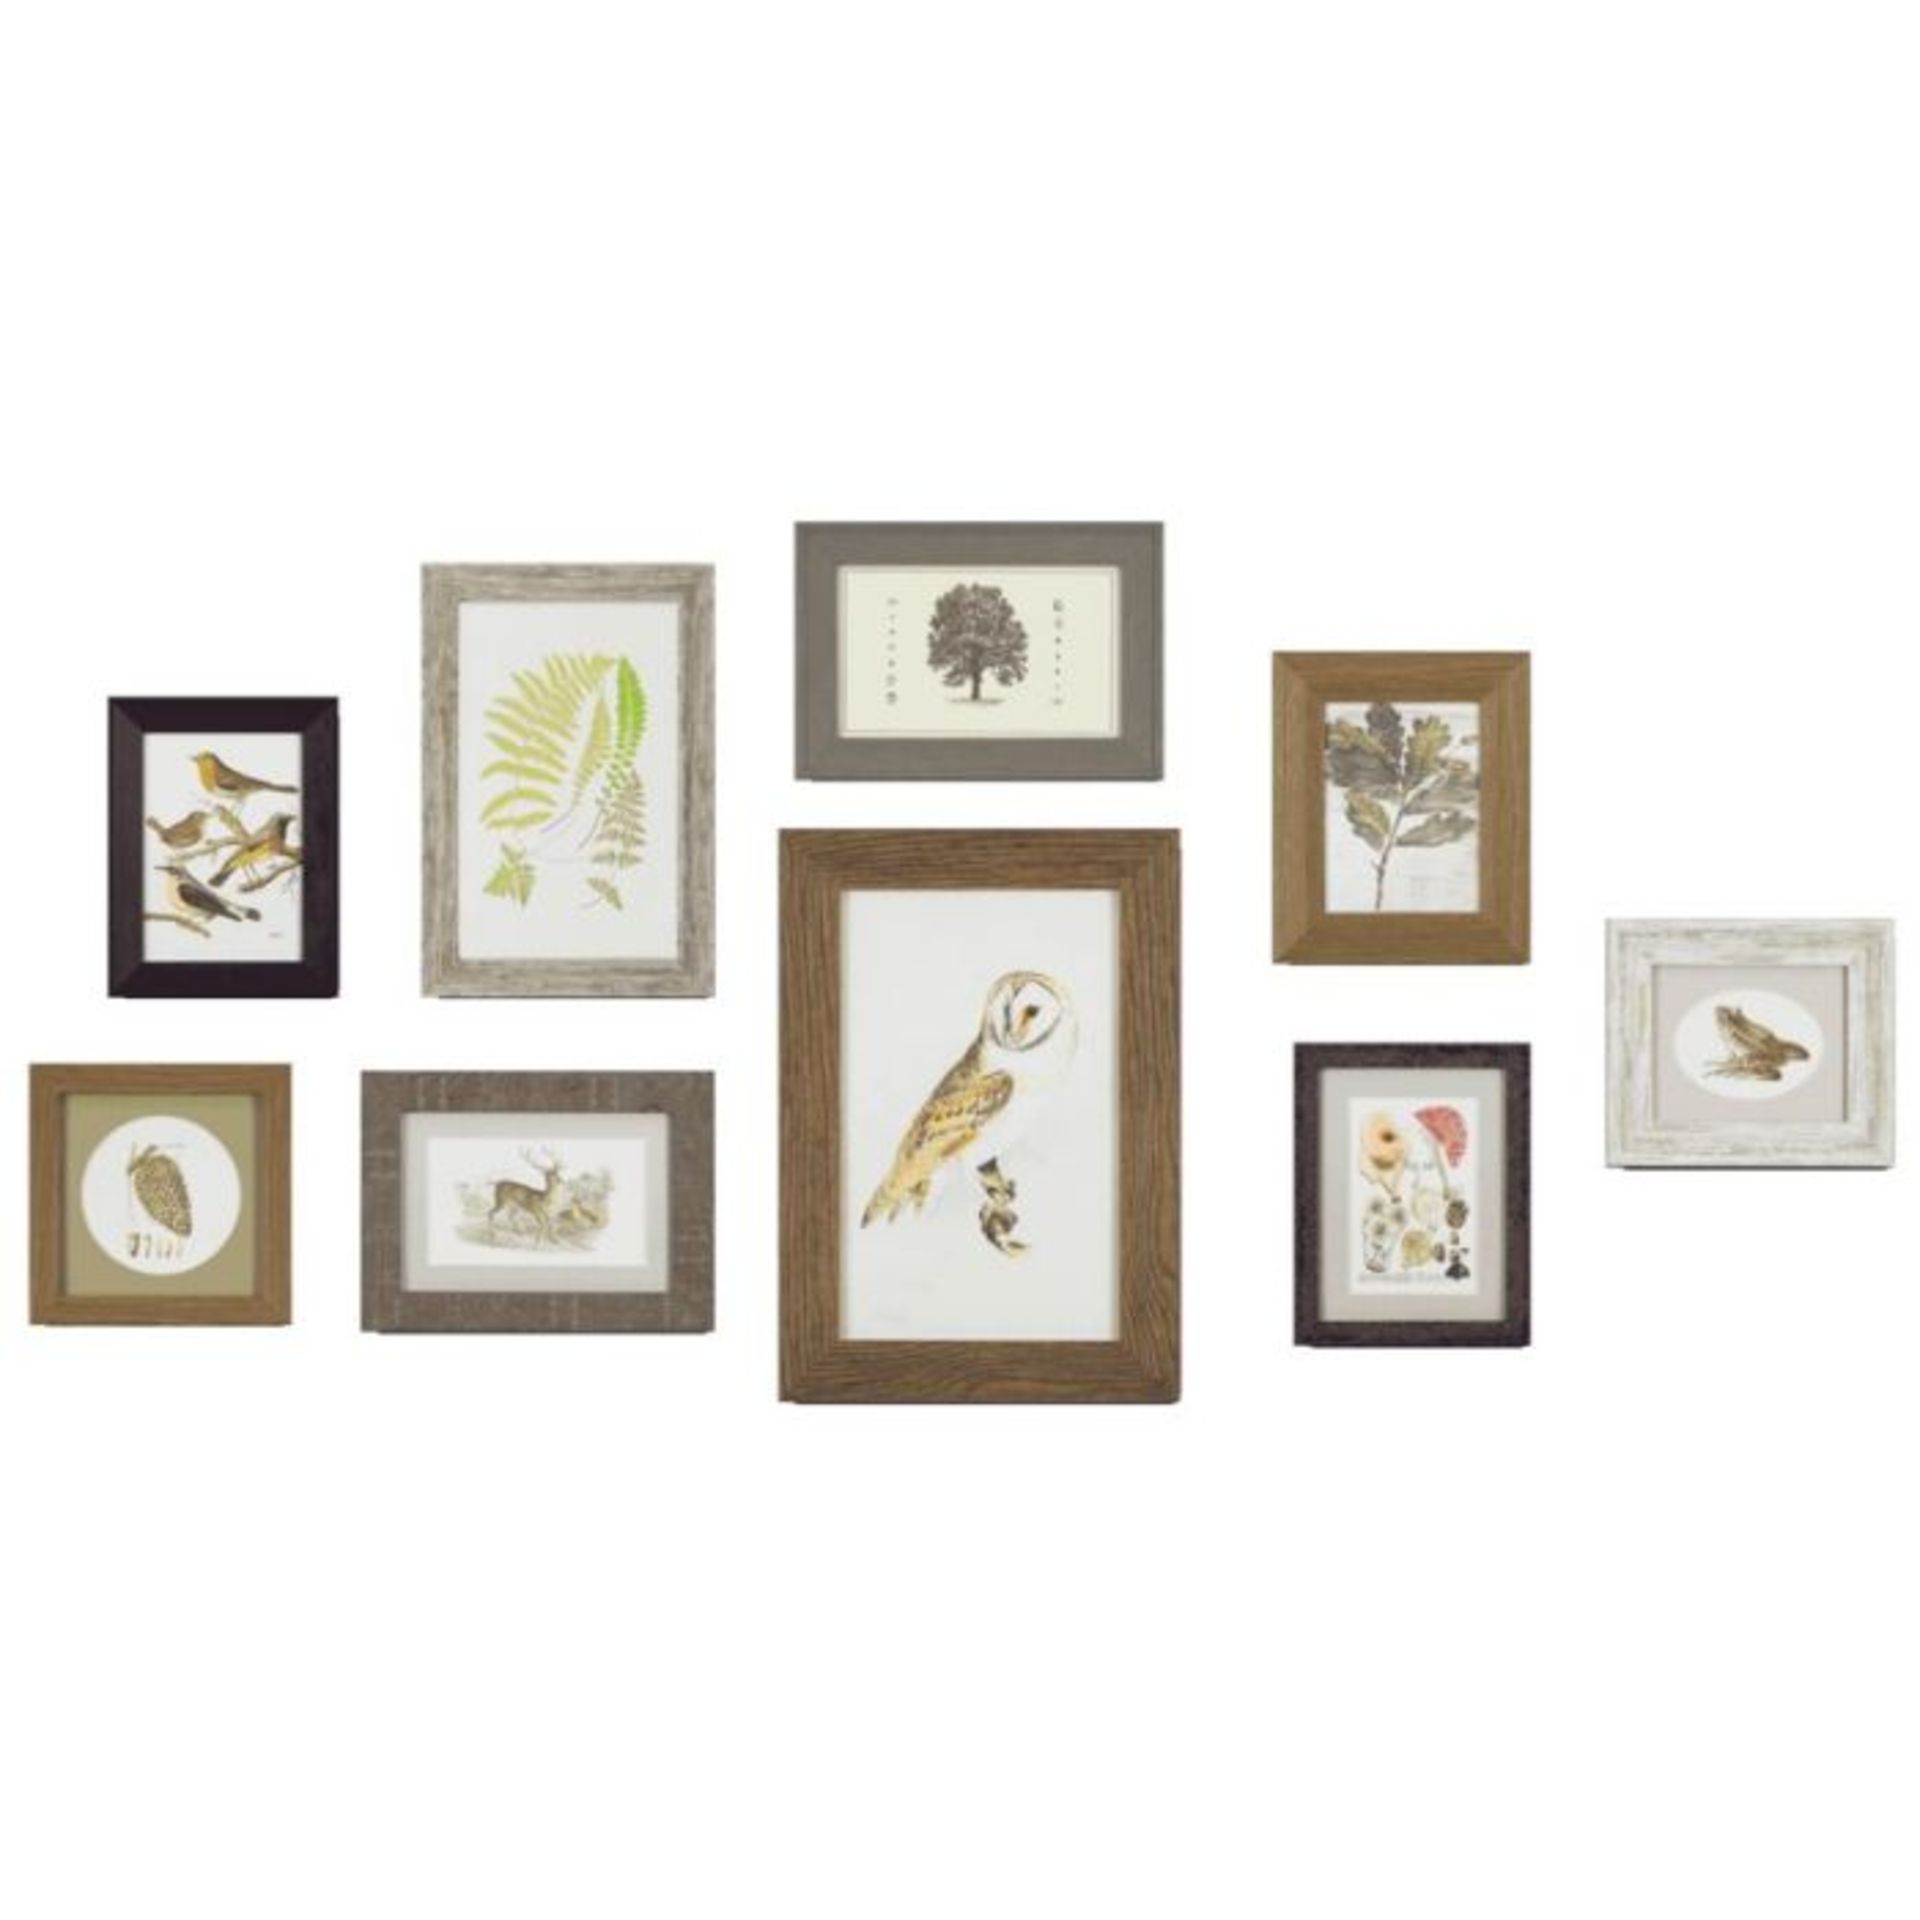 East Urban Home, Woodland Collection' 9 Piece Art Print Set (BROWN/GREEN/IVORY) - RRP £173.99 (